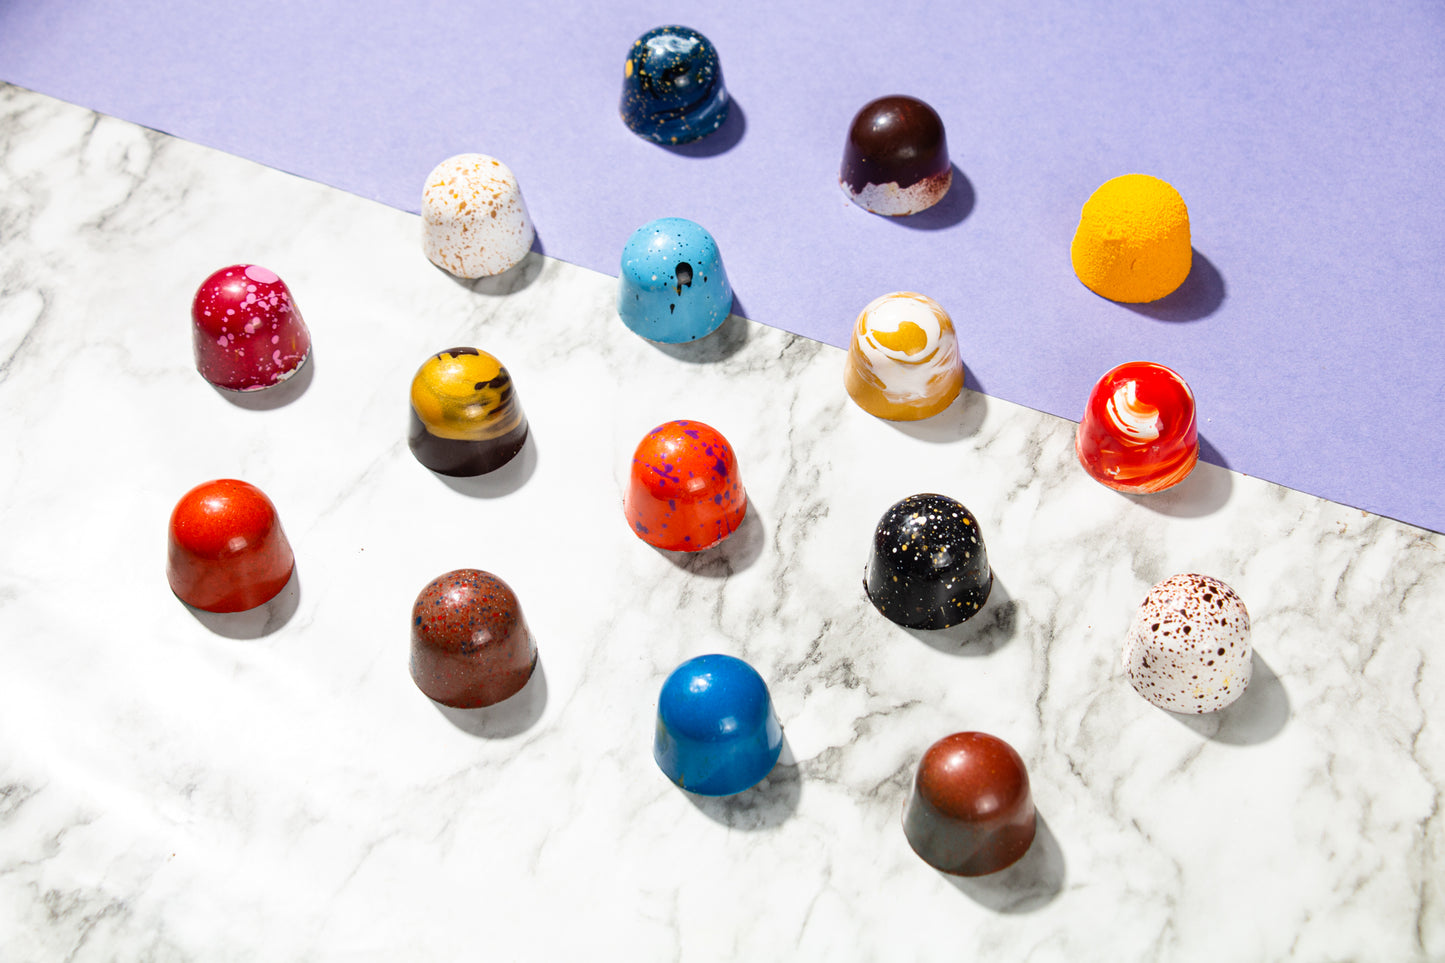 A variety of chocolate bonbons on a marble and purple backdrop